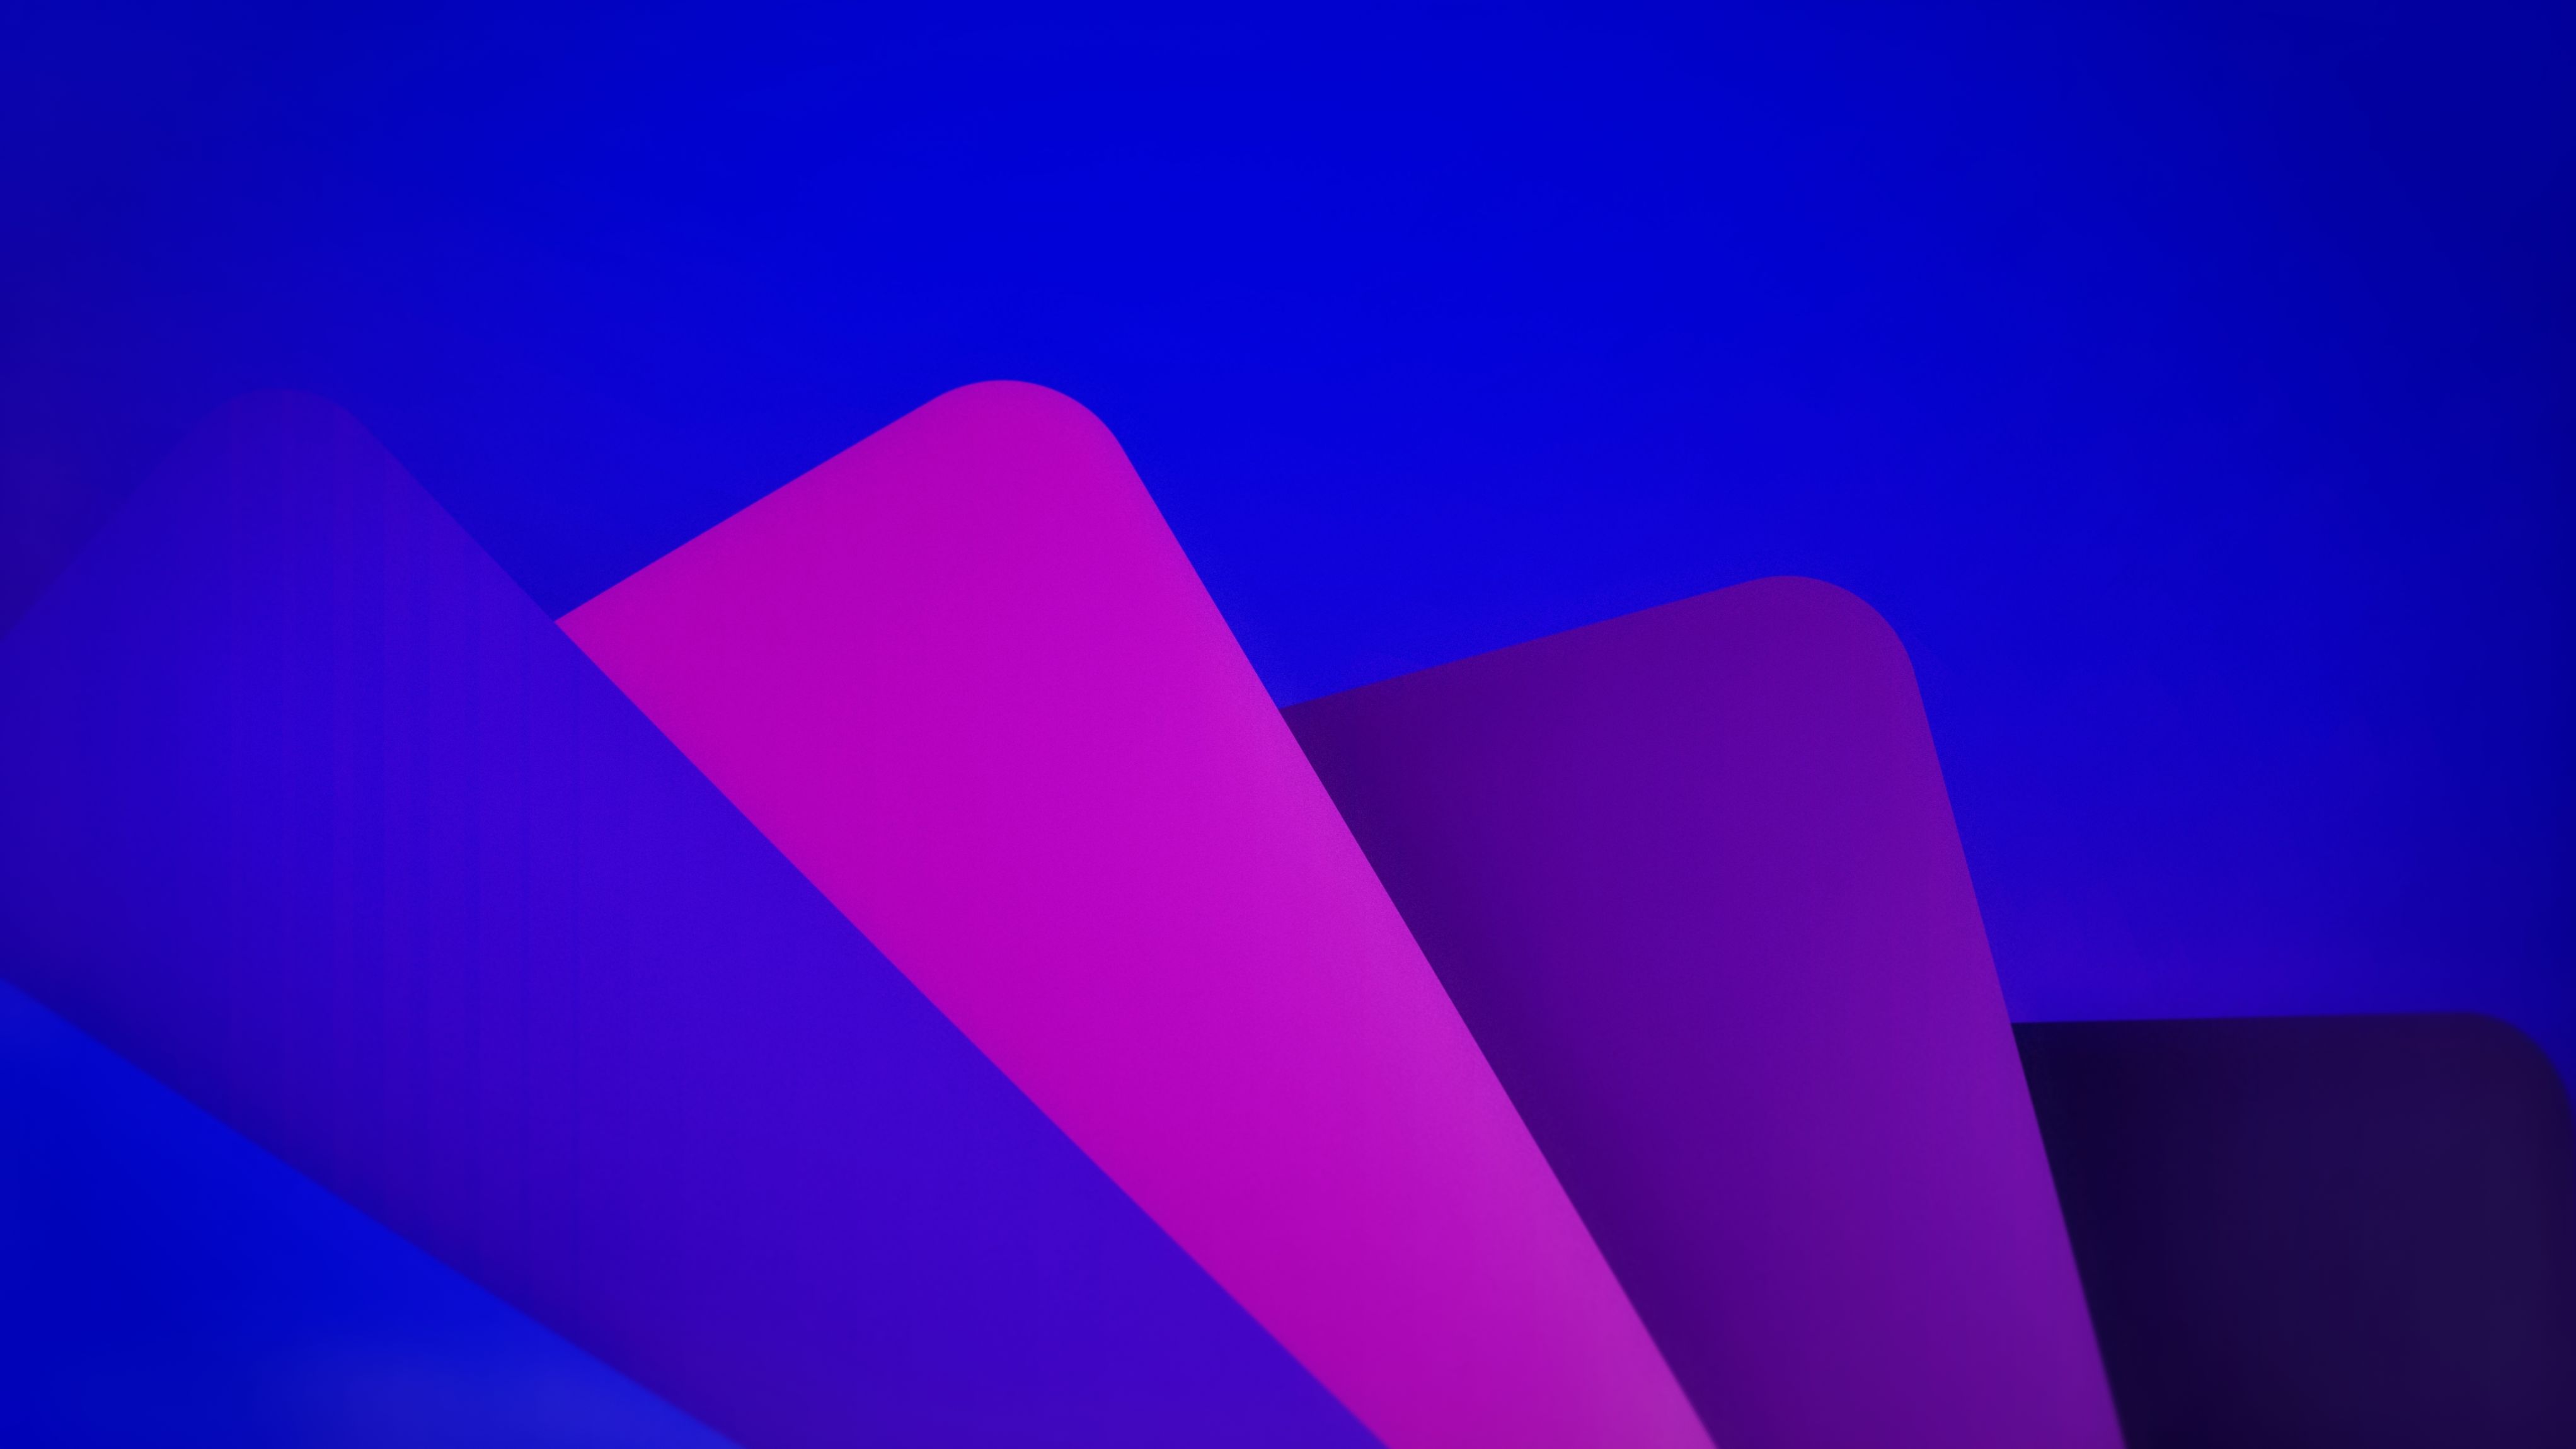 Pages Colorful Minimalism 4088x2300